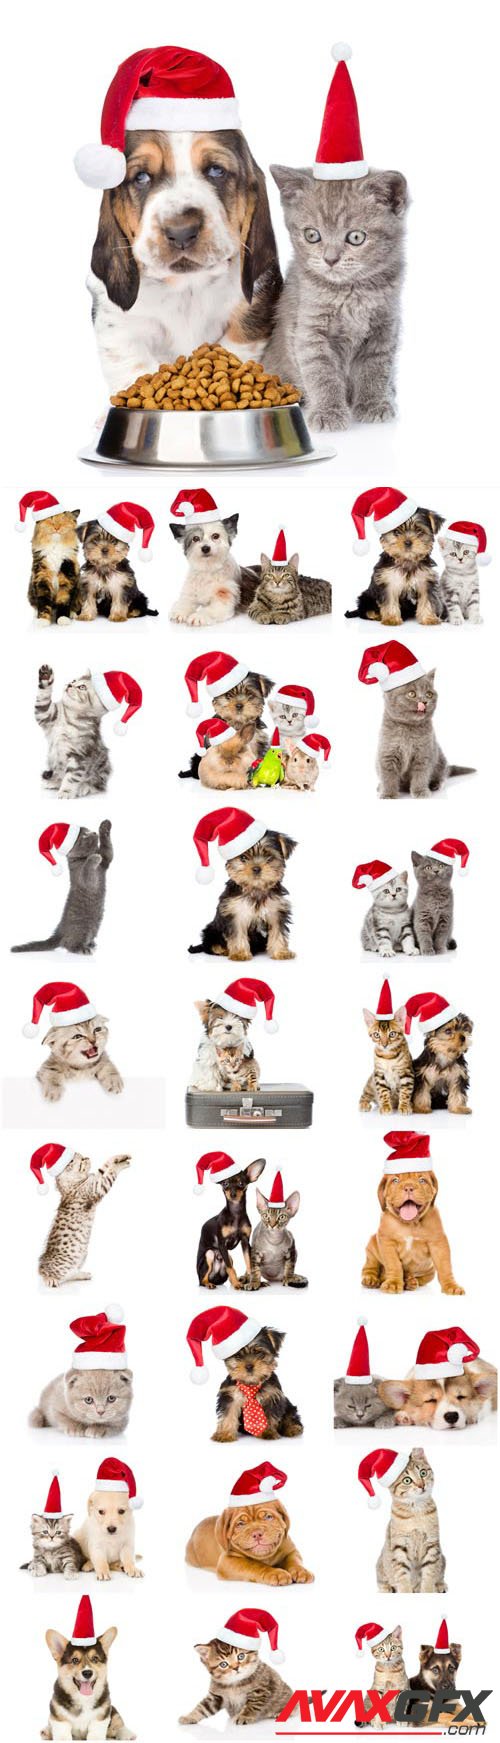 New Year and Christmas stock photos №52